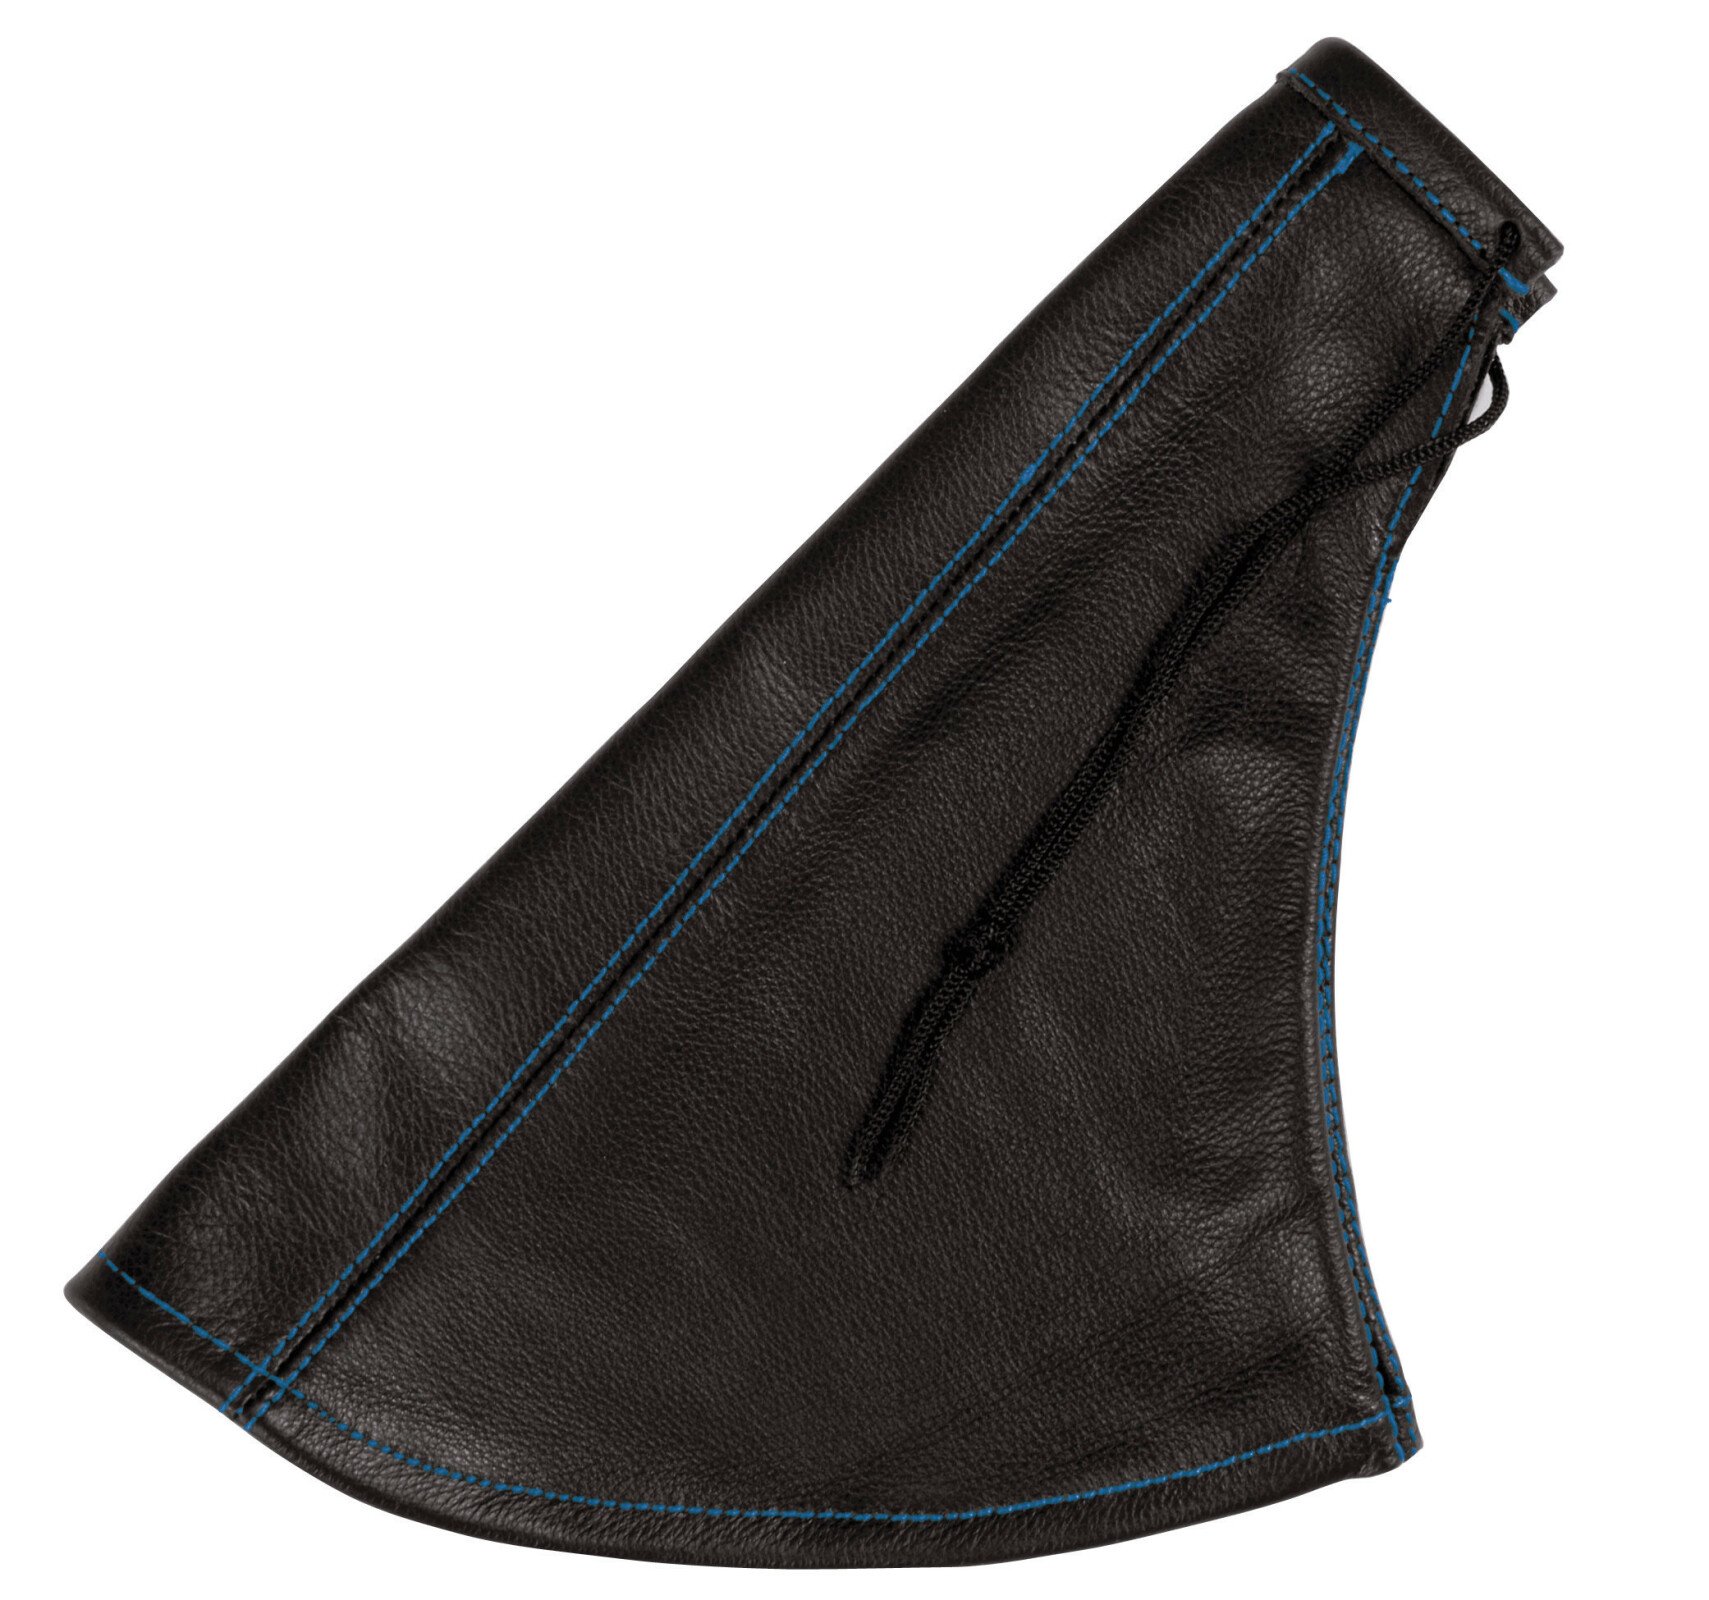 Exclusive leather central handbrake boot - Black/Blue thumb